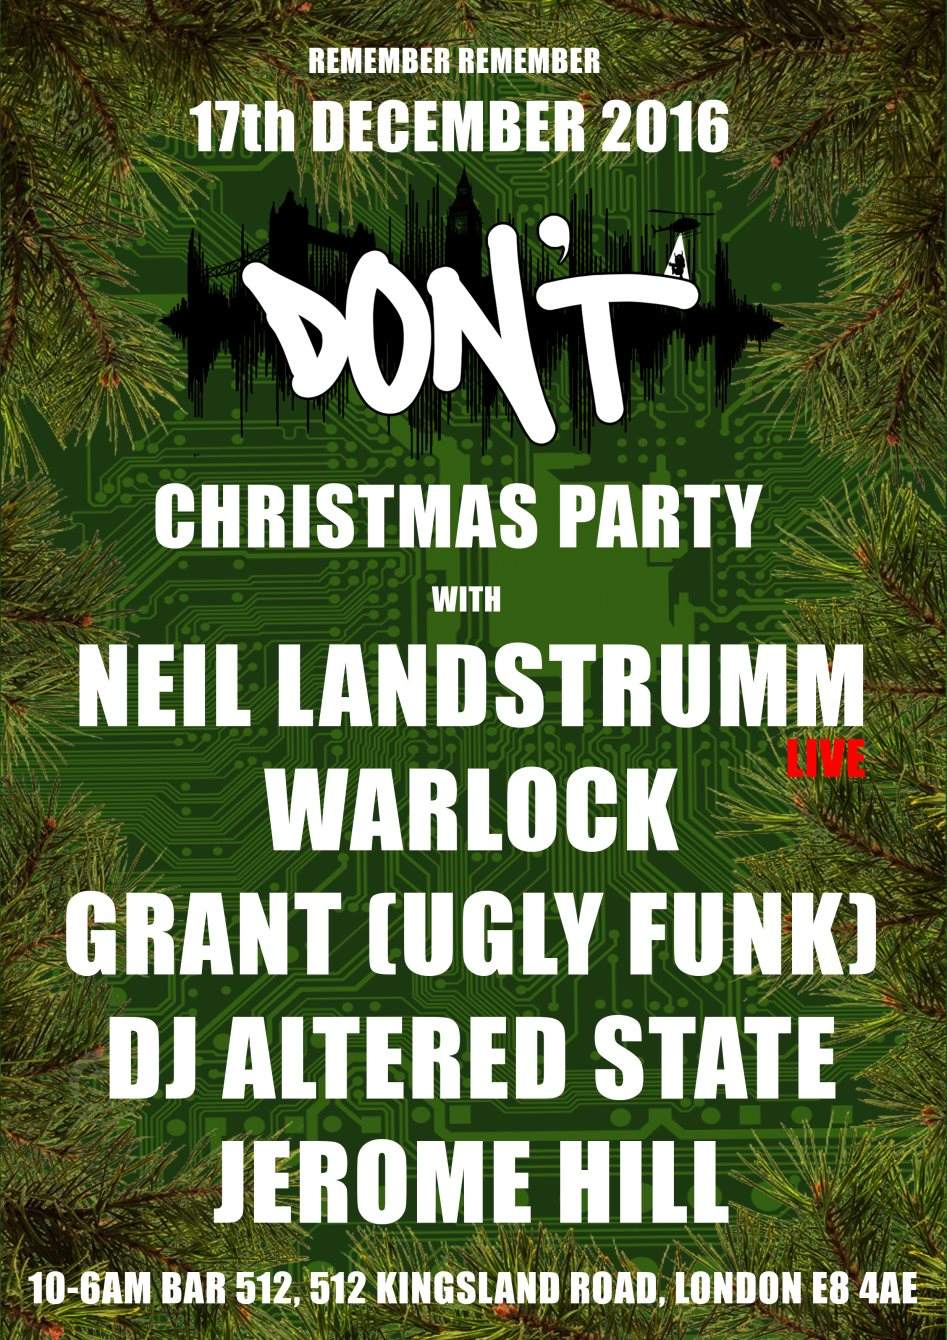 Don't - The Christmas Party with Neil Landstrumm Live - フライヤー表